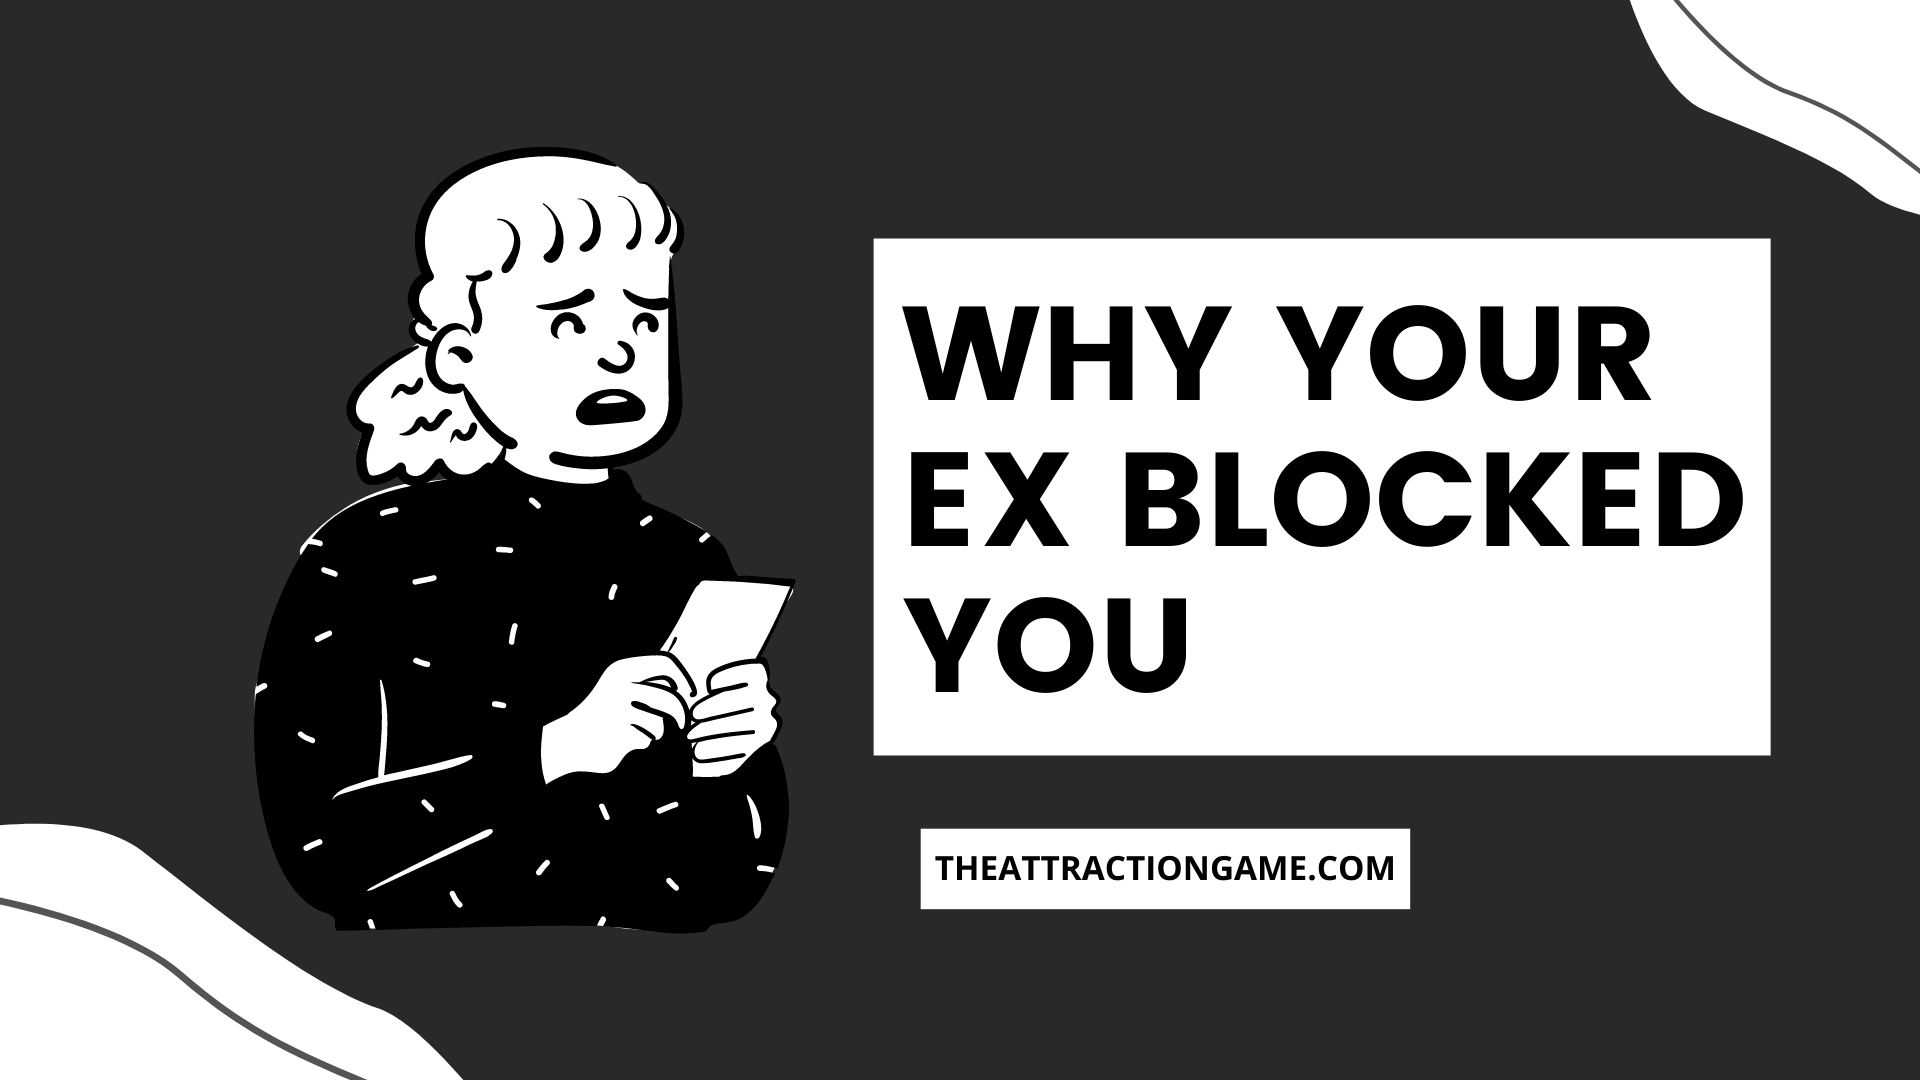 why your ex blocked you, why did your ex block you, reasons why your ex blocked you, why did my ex block me